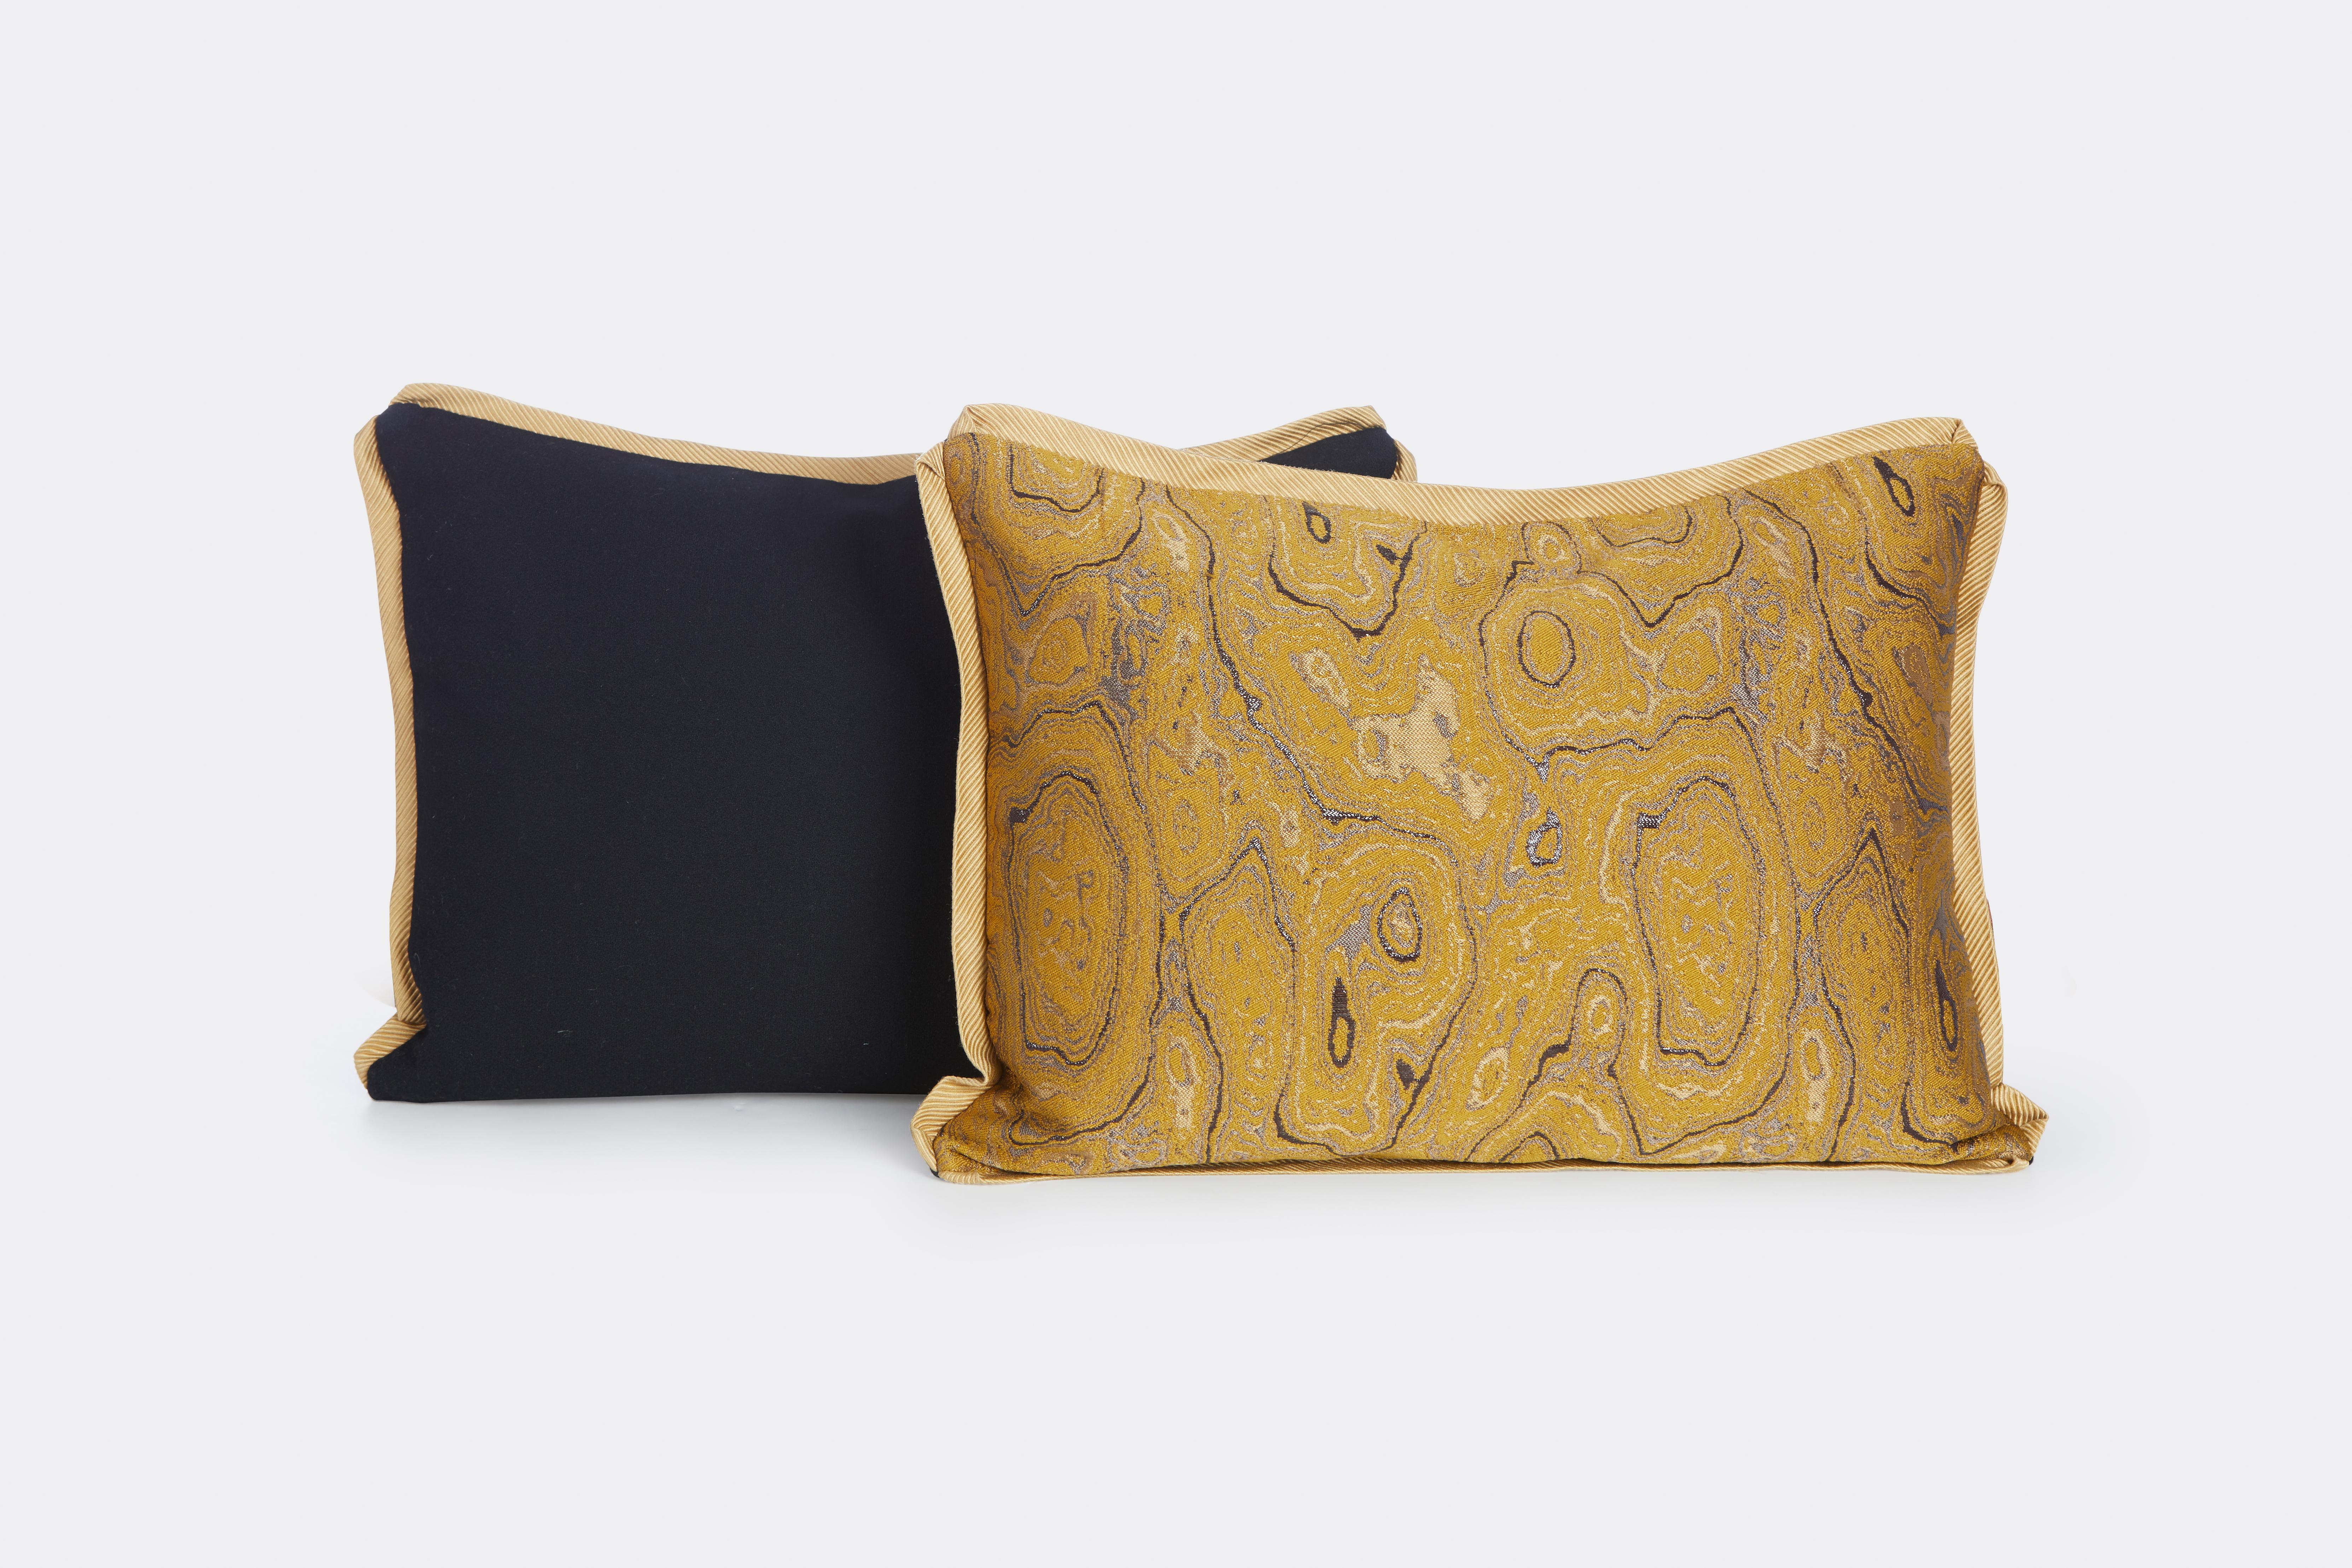 Pair of Brocaded Silk with Metallic Thread Dries Van Noten Fabric Cushion In New Condition For Sale In New York, NY